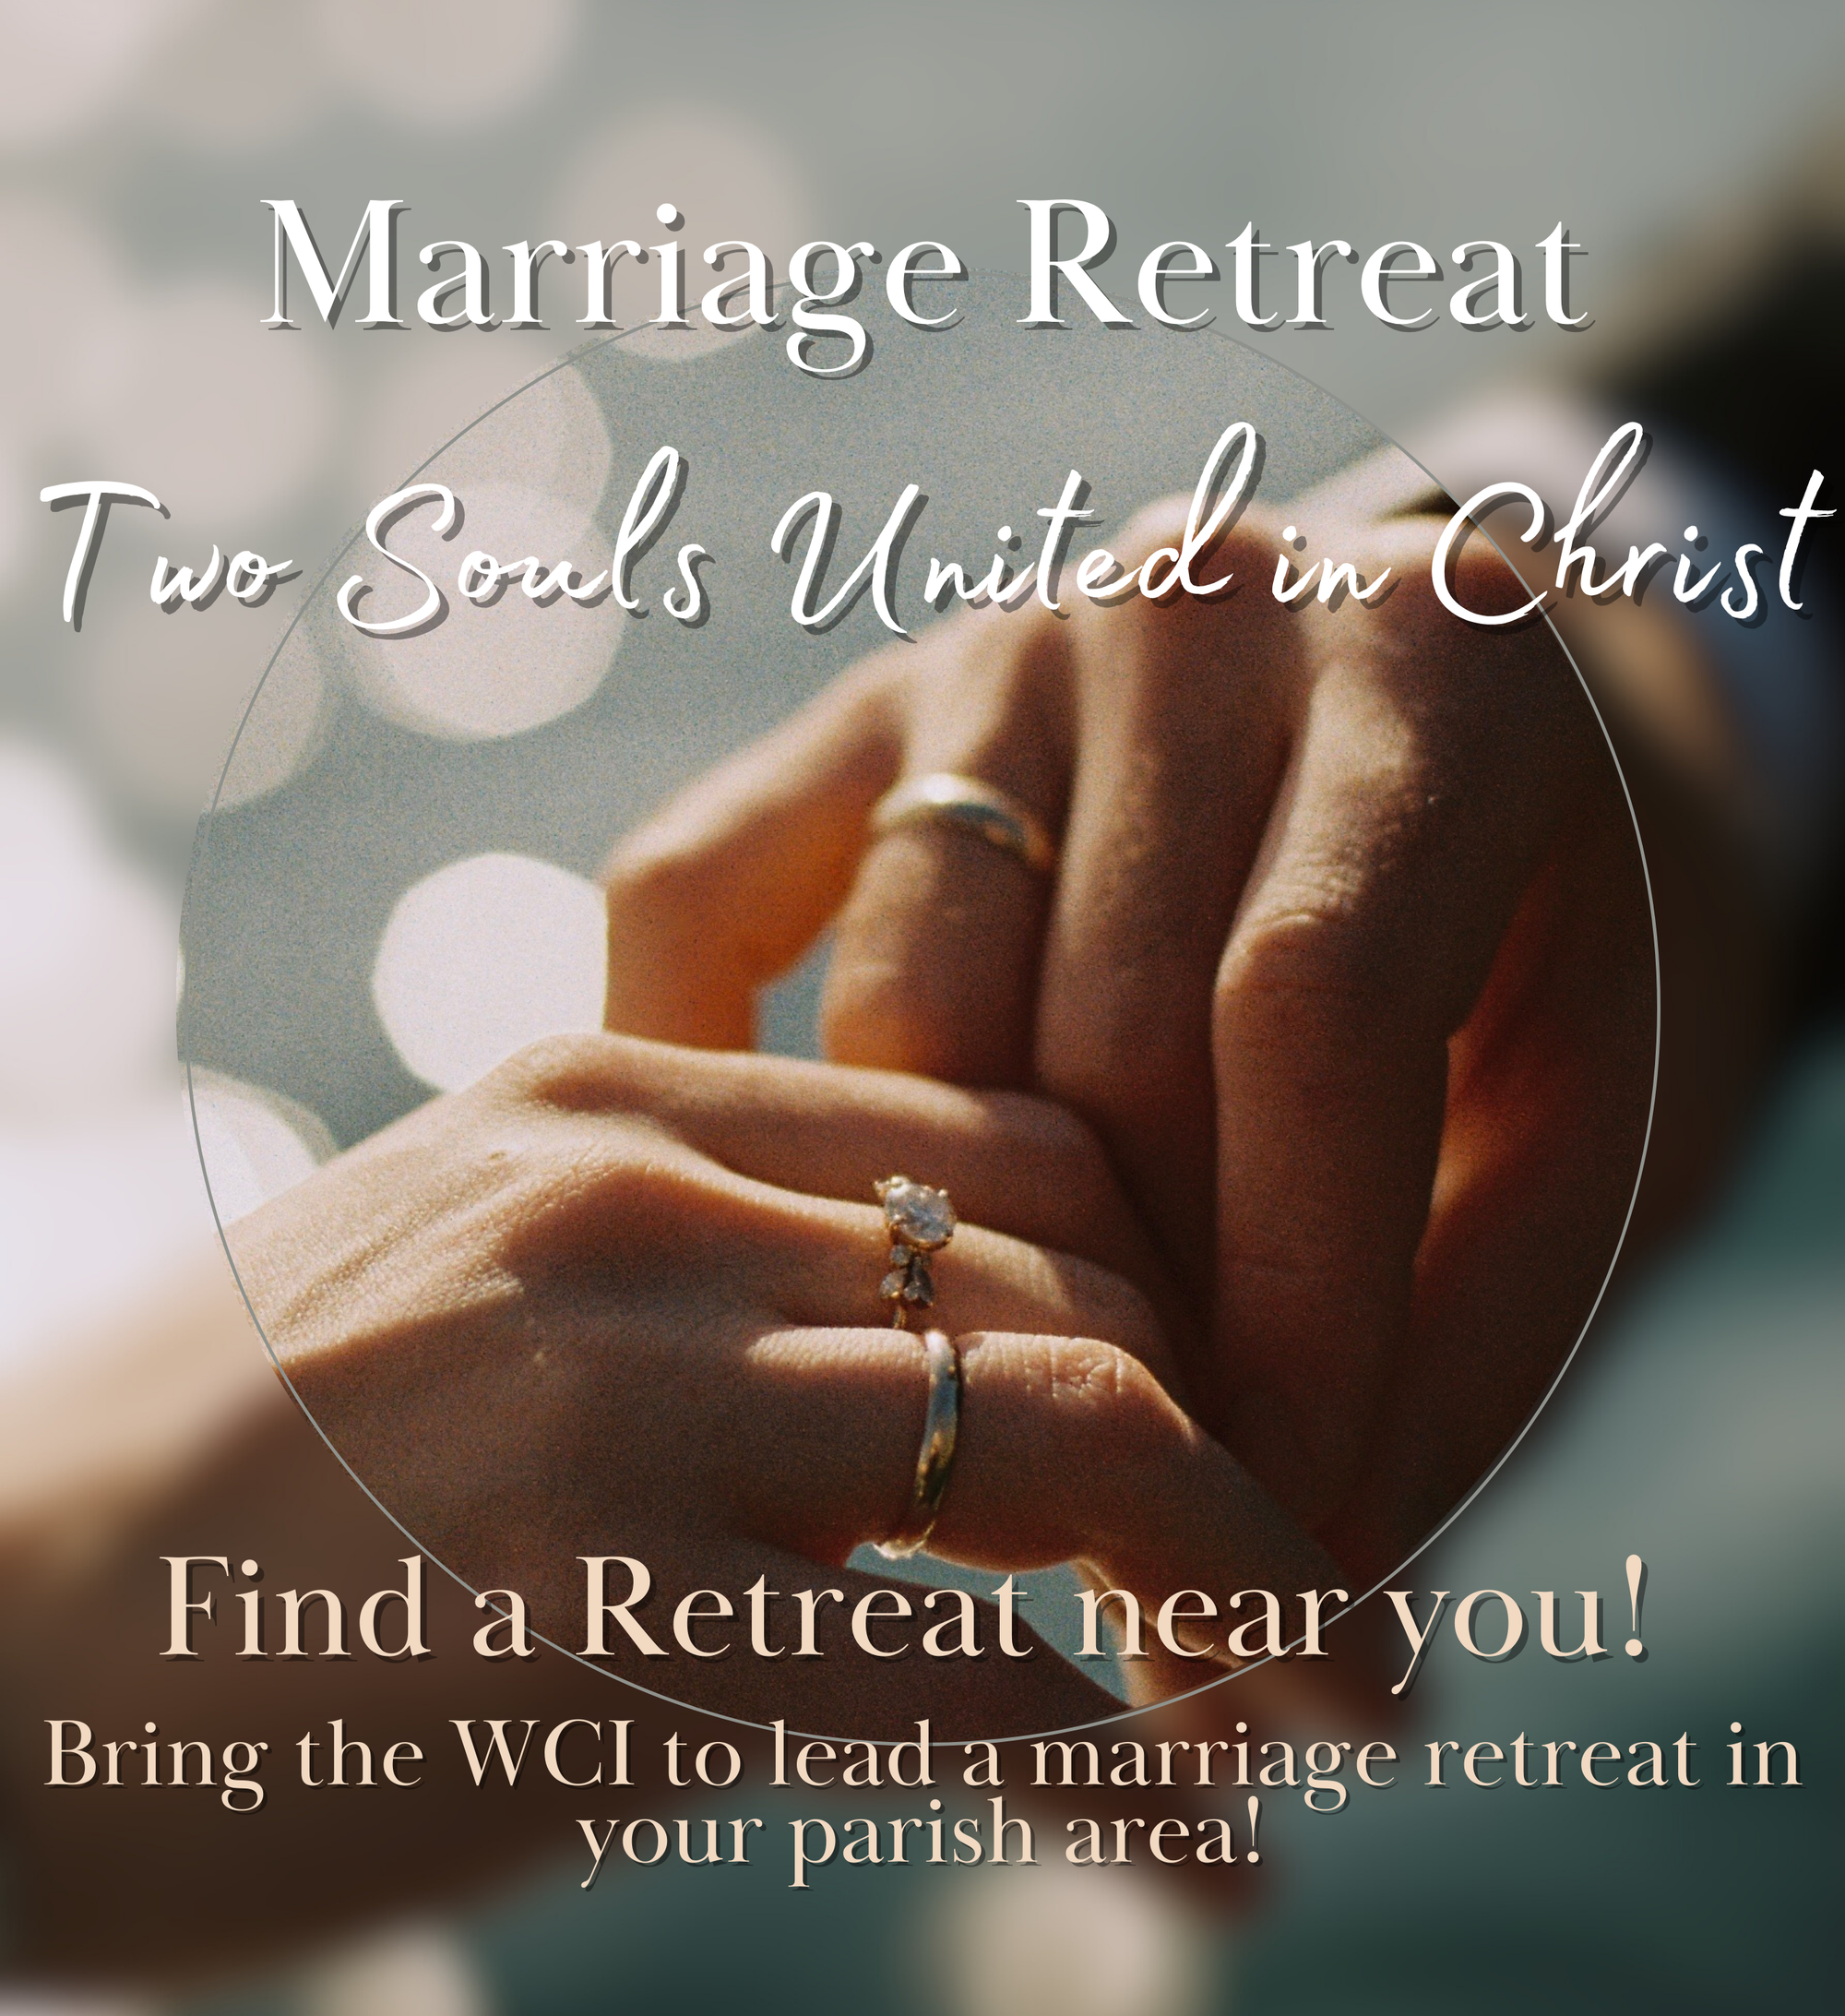 GIFT YOUR BELOVED WITH A MARRIAGE RETREAT